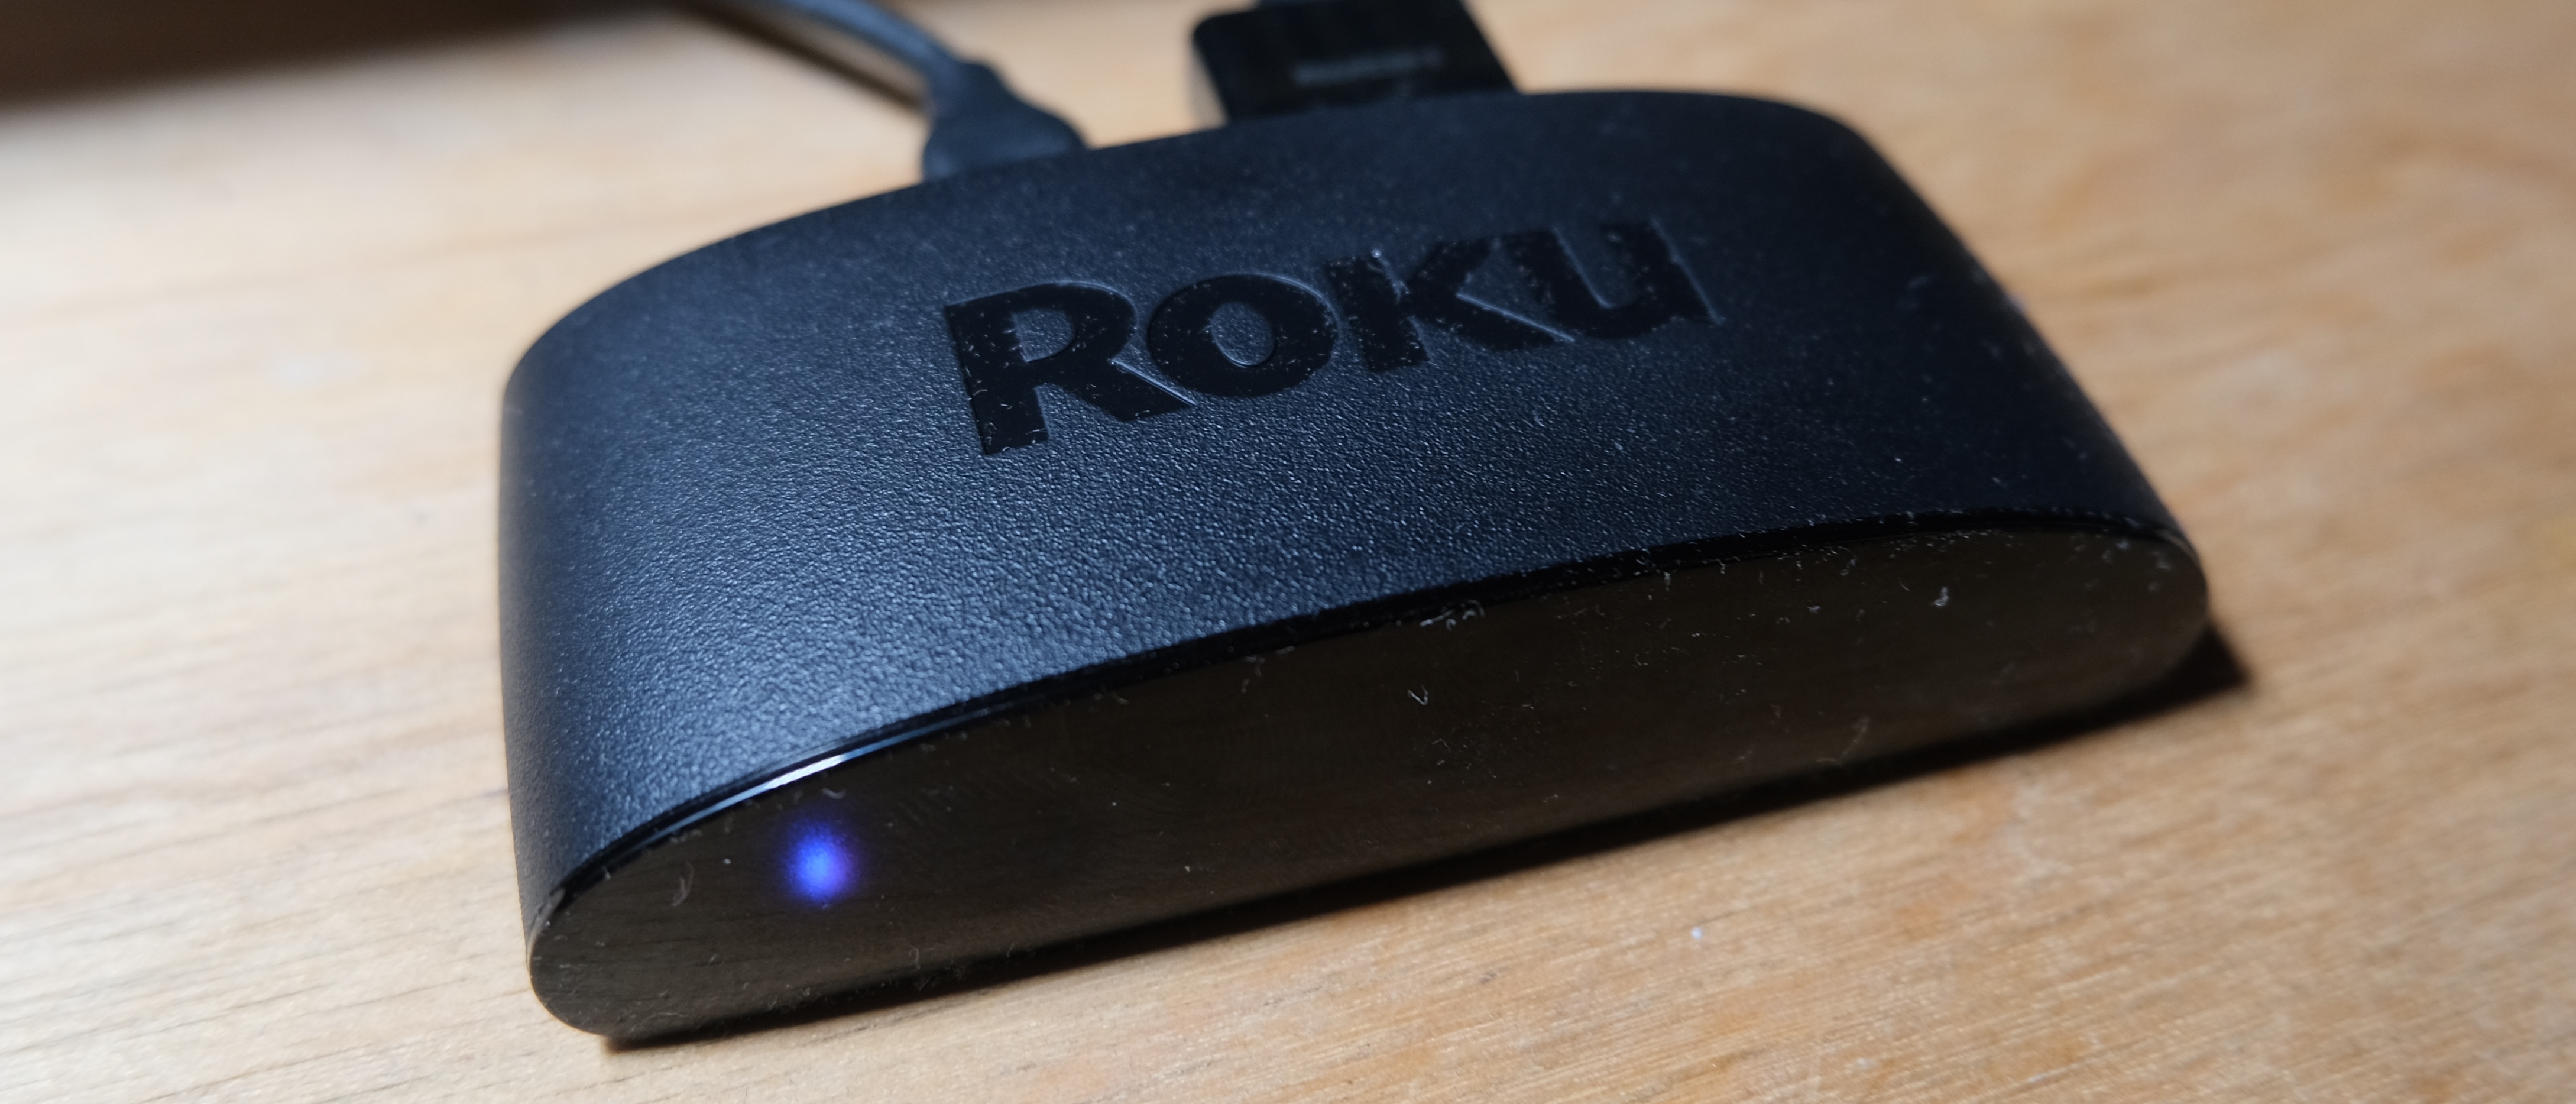 Roku Express 4K Plus review: The best streaming device under $40